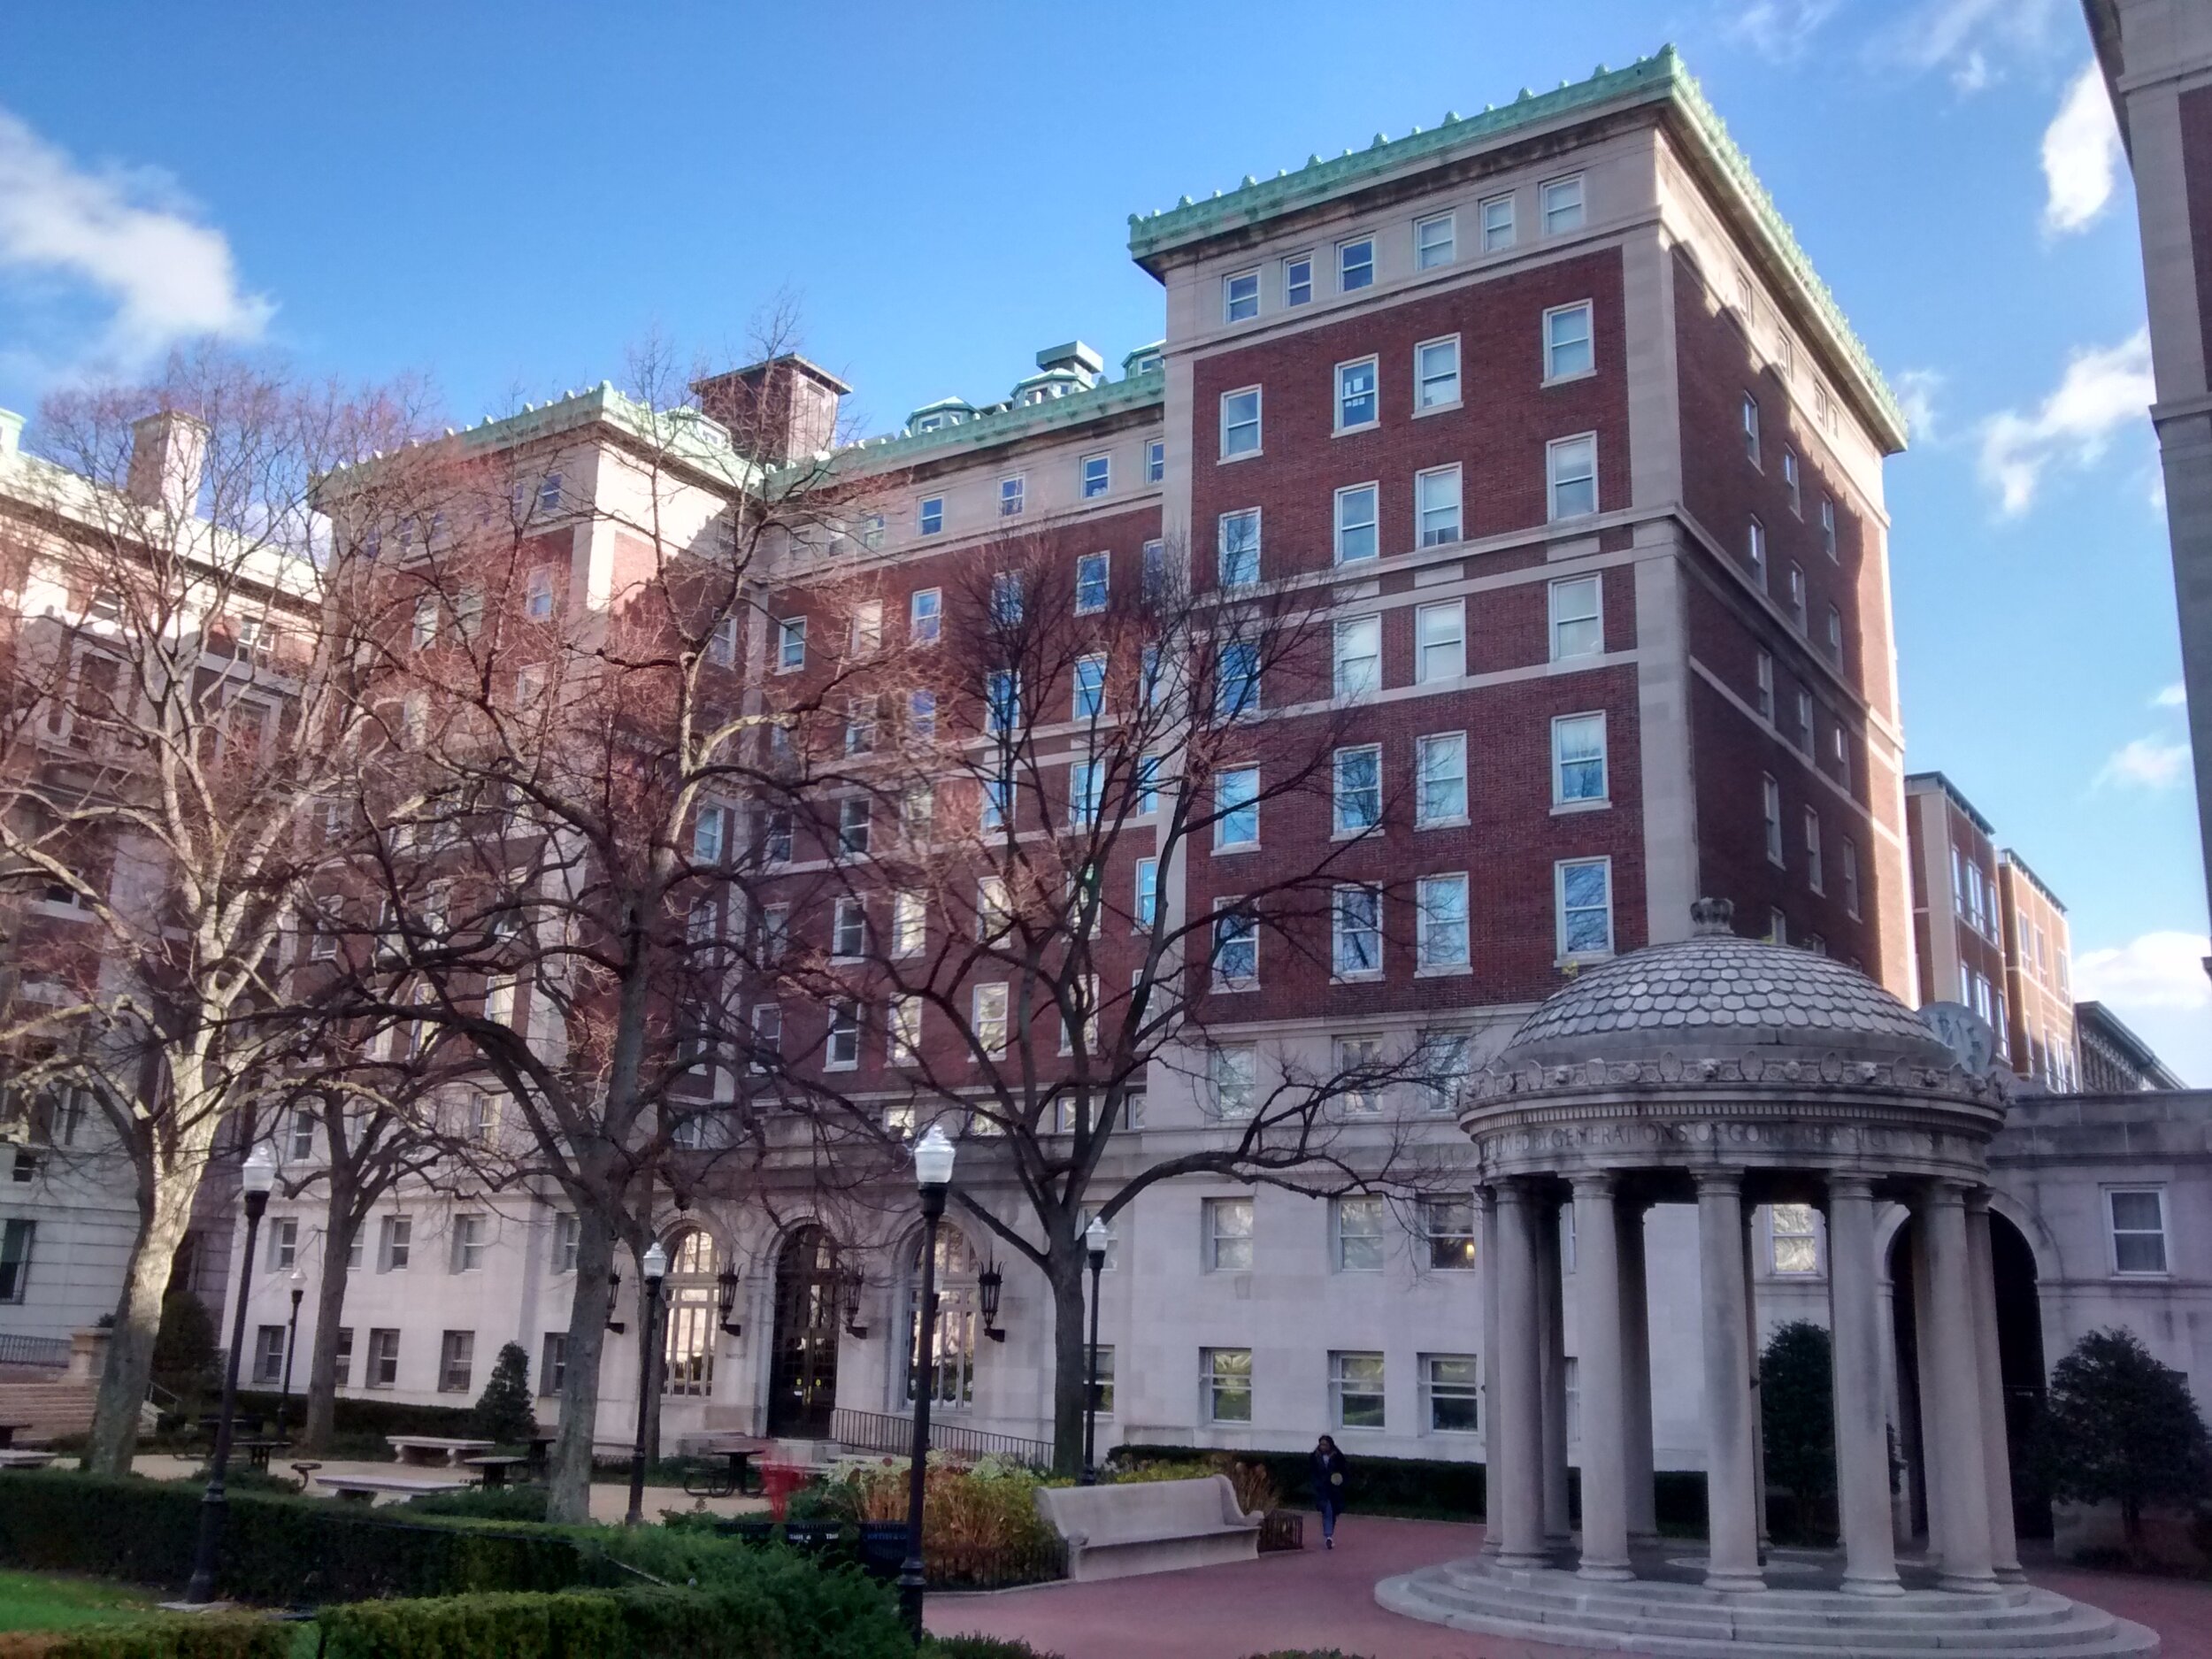 Breaking: Columbia to Offer Interim Housing This Week for the Period Between Wednesday and Friday, Called “Thursday”